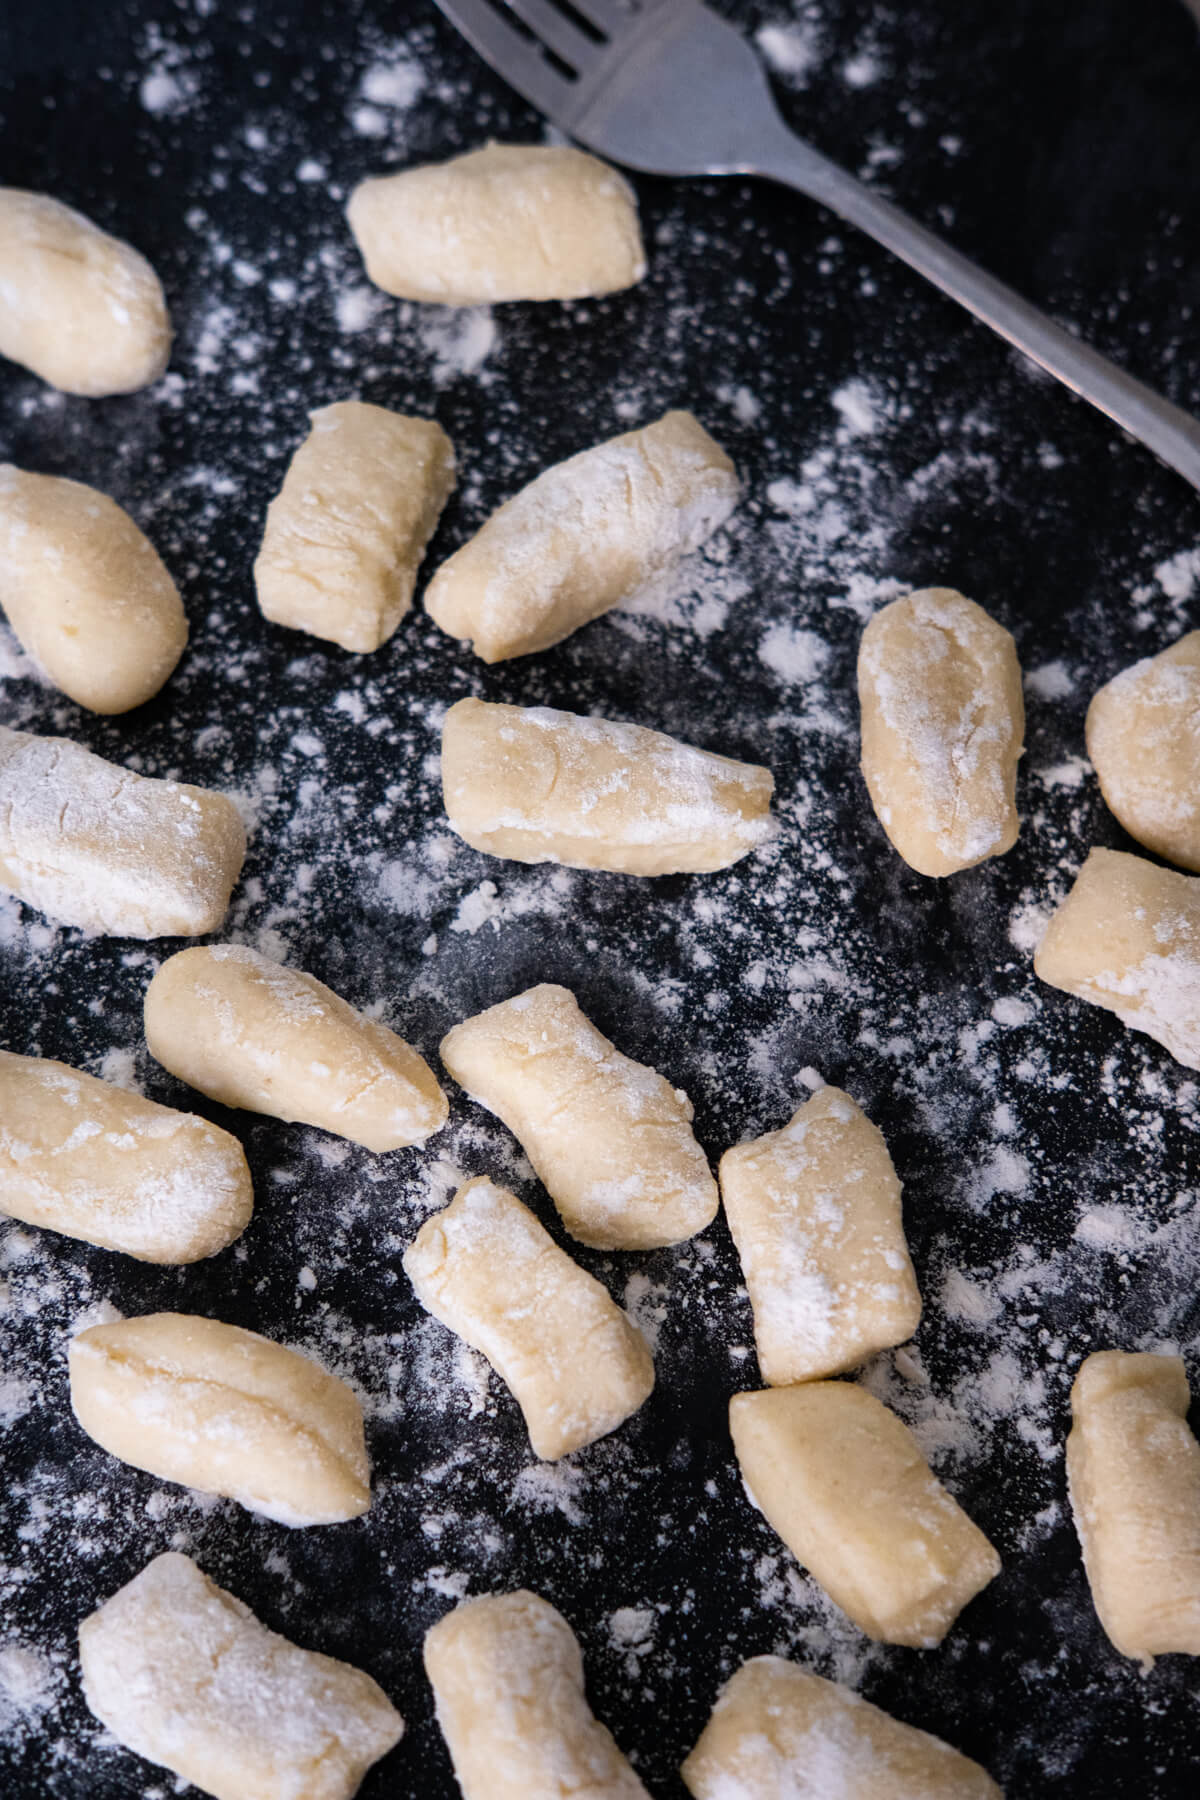 Gnocchi dusted with flour on a working surface.